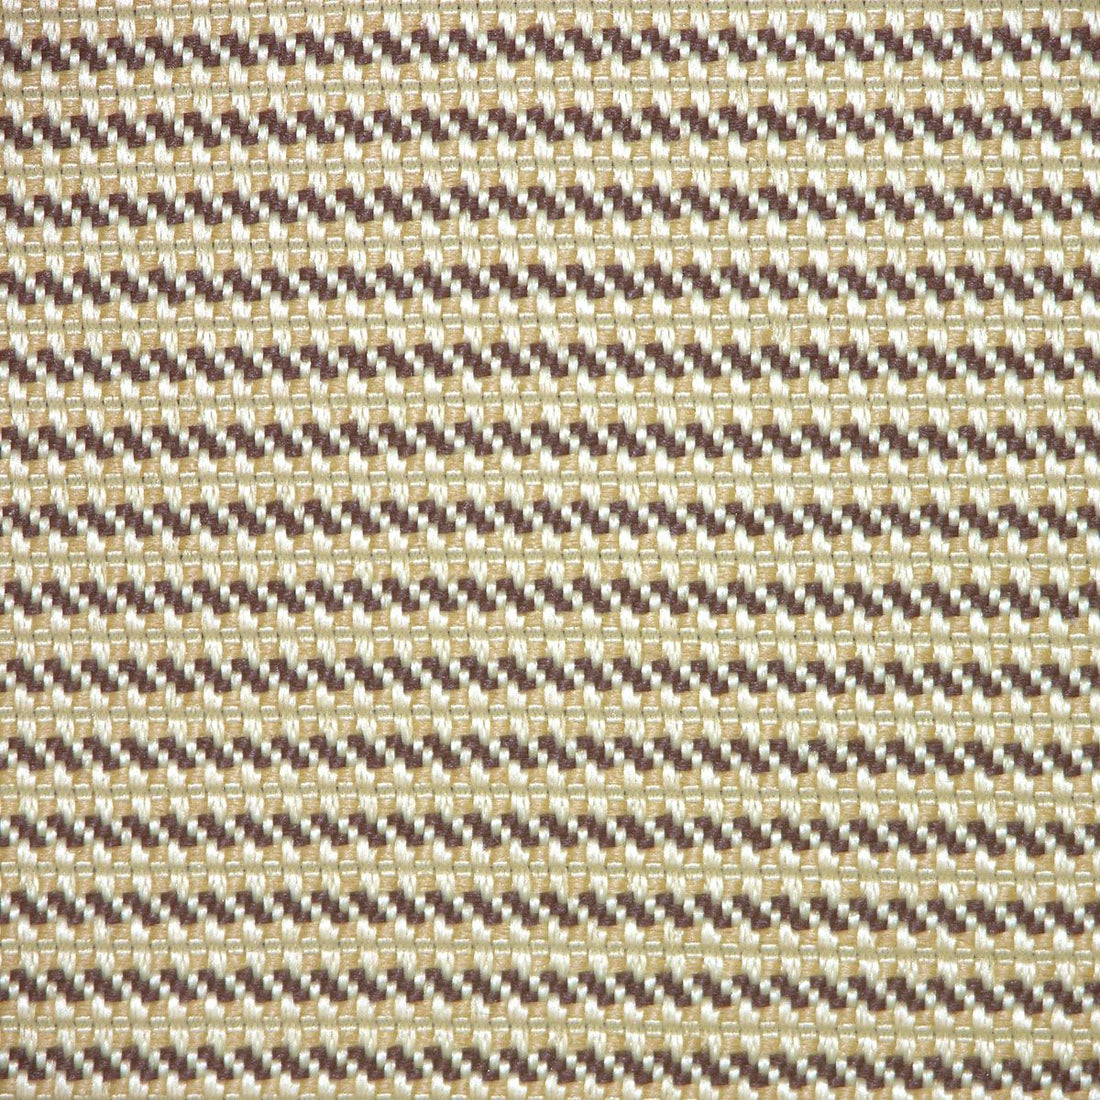 Shoreline fabric in dune color - pattern number WR 52143953 - by Scalamandre in the Old World Weavers collection